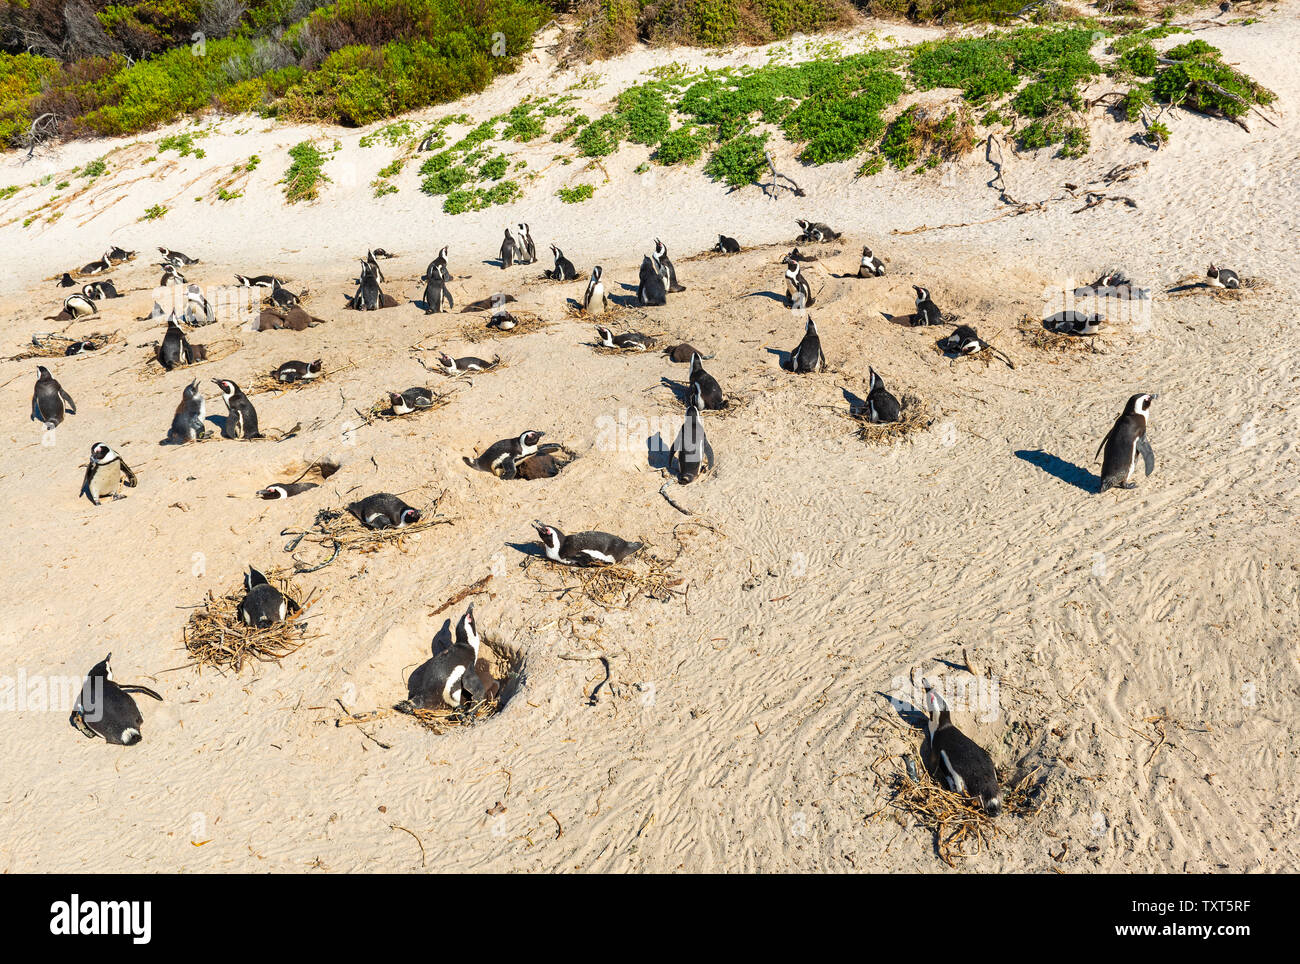 Colony of nesting black-footed (Spheniscus demersus), jackass or African penguins in a sand dune, Boulder Beach, Cape Town, South Africa. Stock Photo